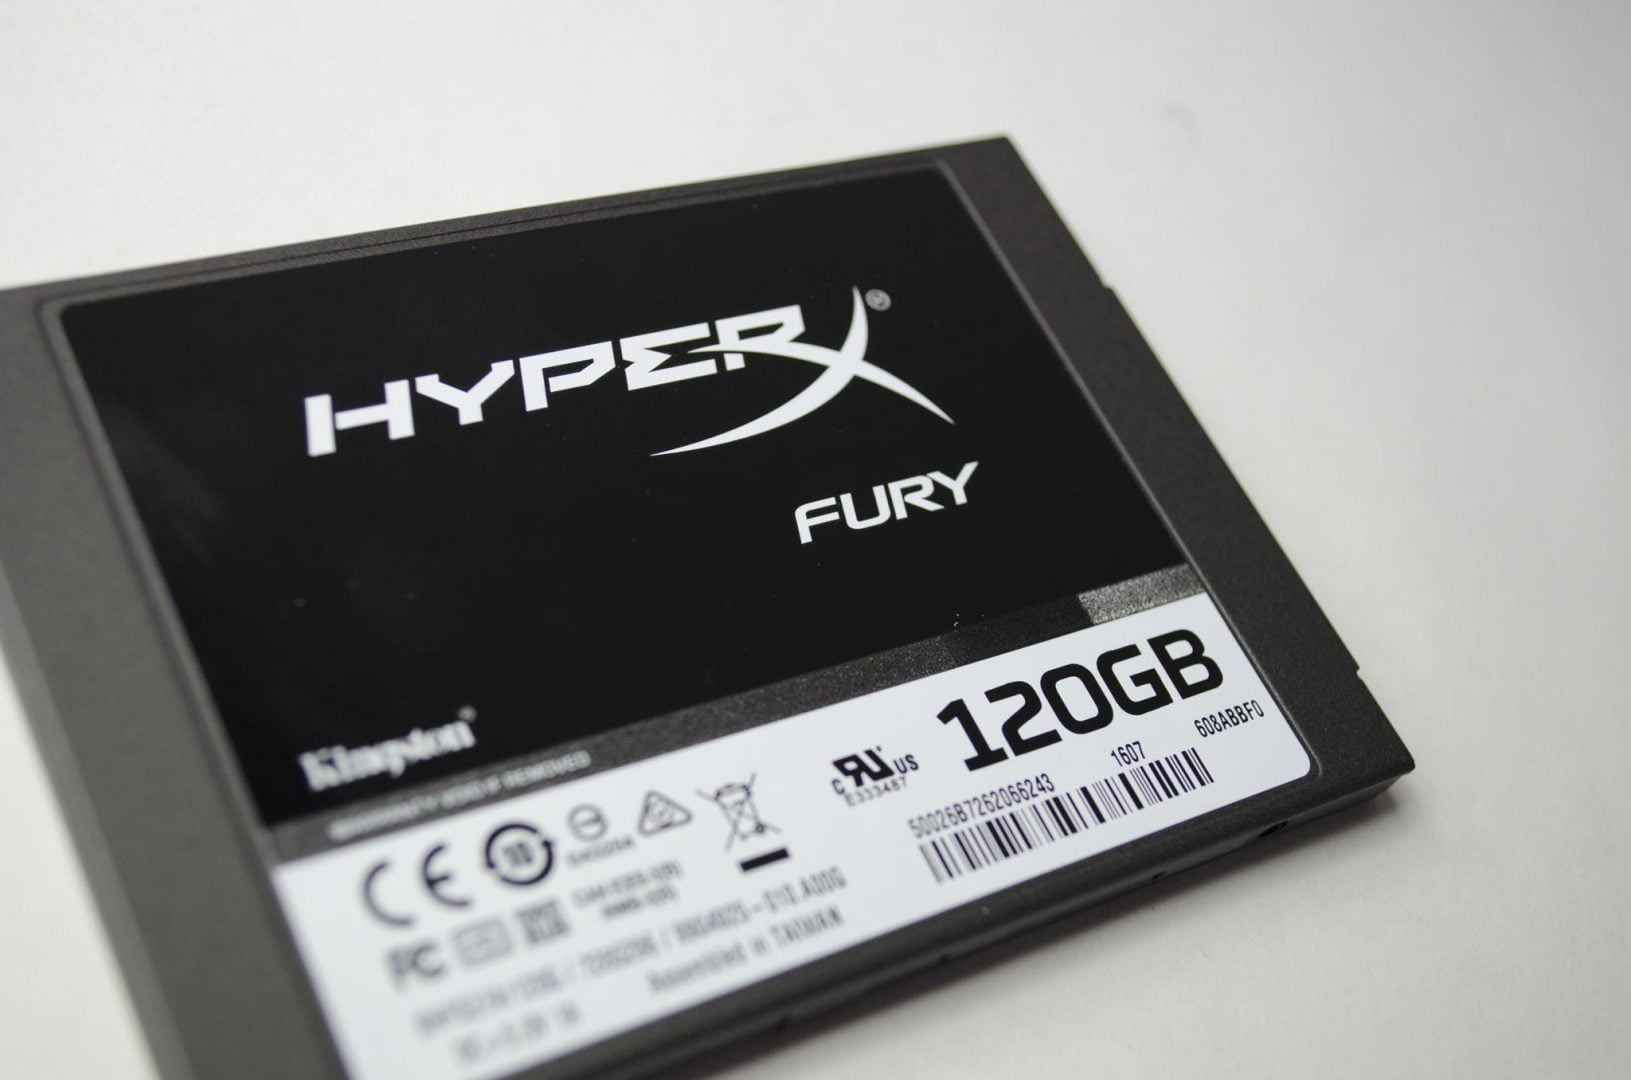 Incense Hidden Staple HyperX Fury 120GB SSD Review With Raid Tests - EnosTech.com